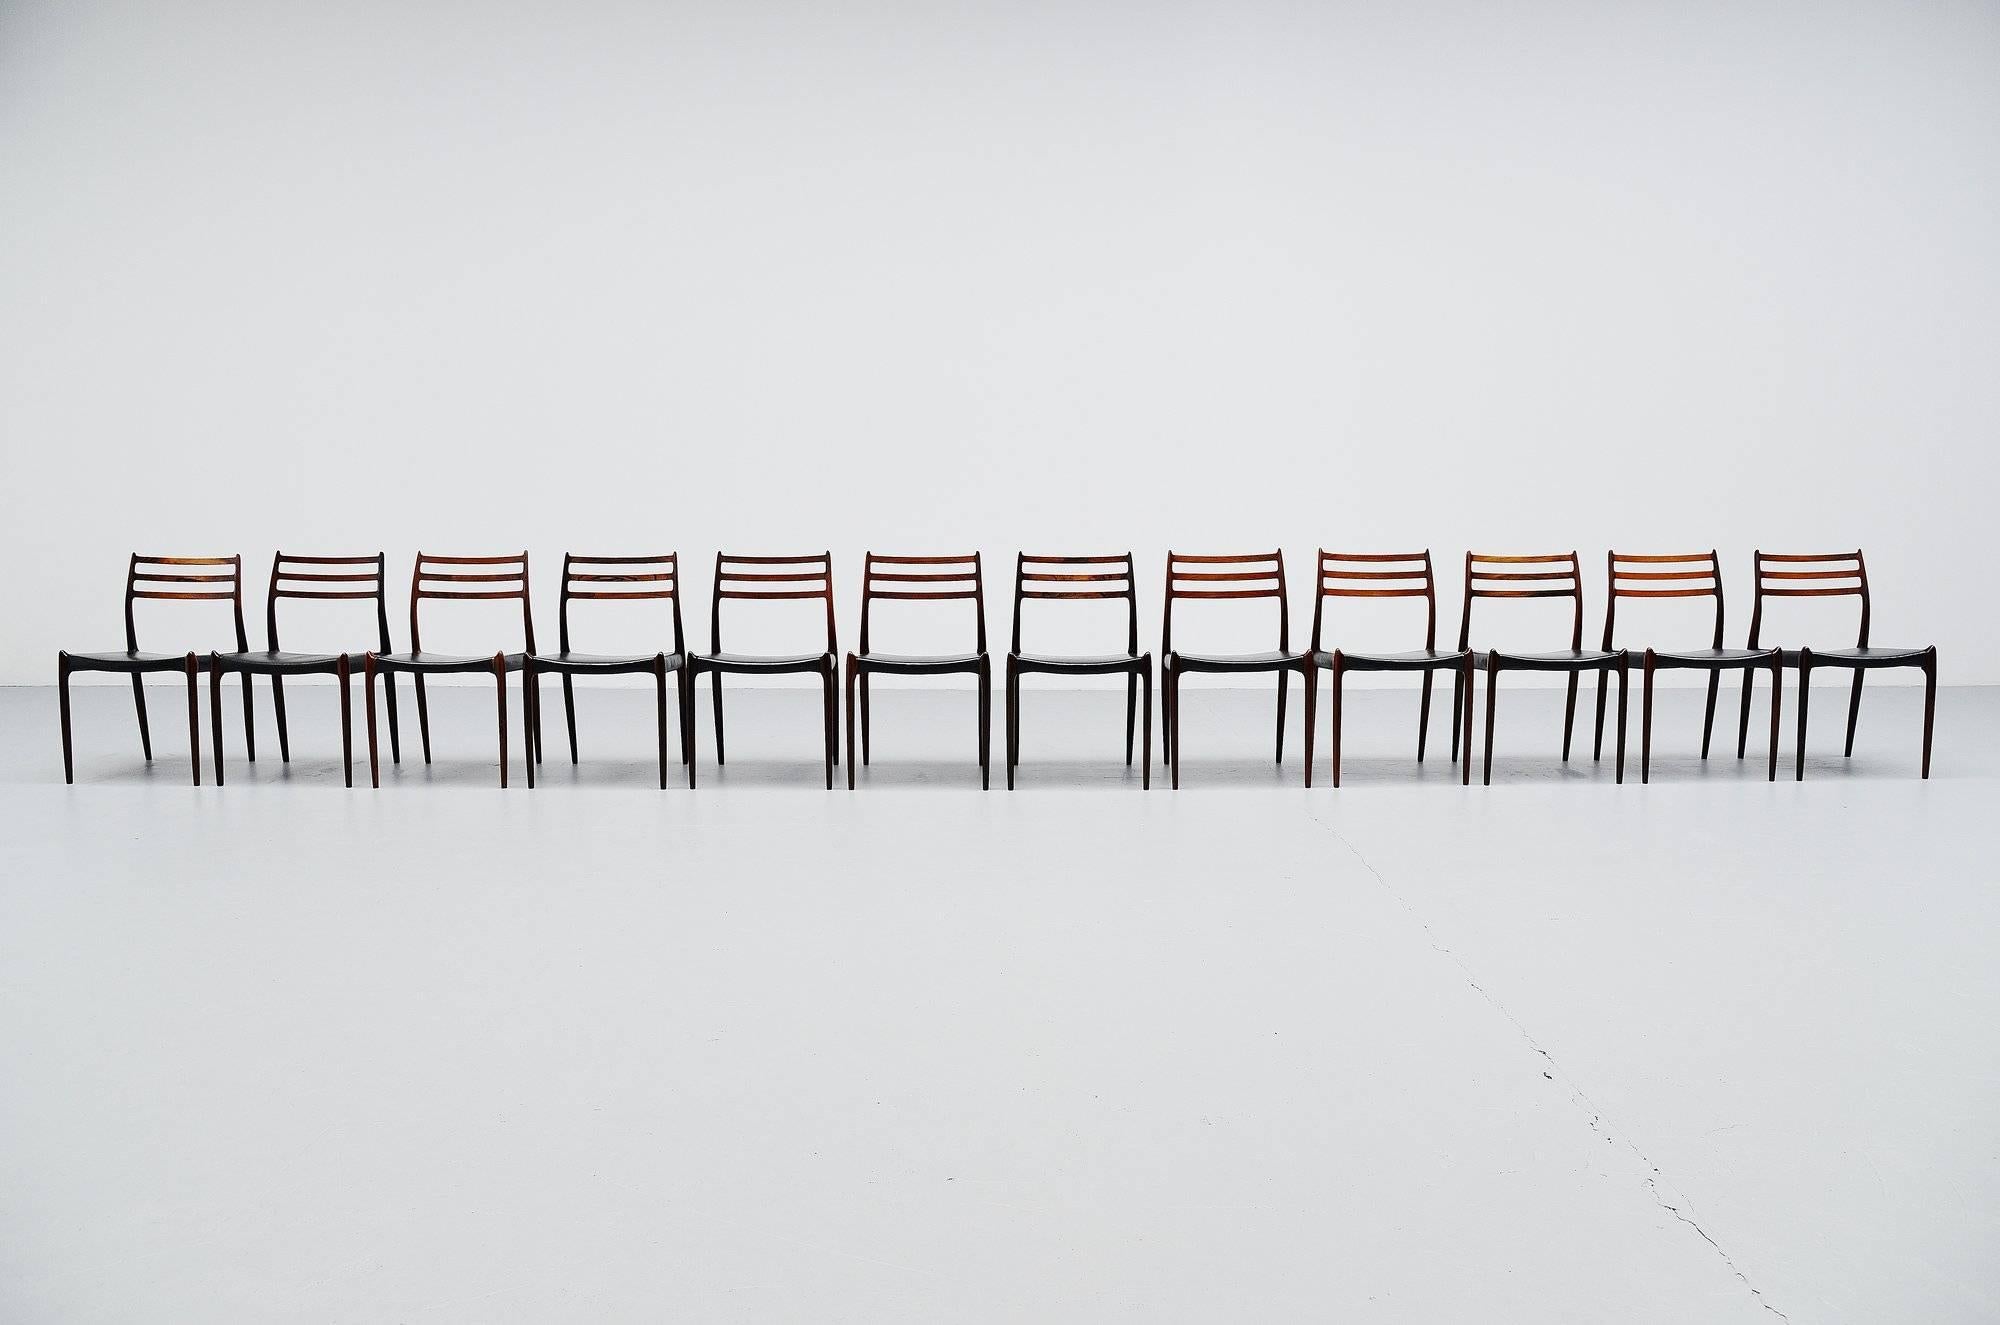 Sculptural dining chairs designed by Niels O. Møller, manufactured by J.L. Møller Mobelfabrik, Denmark, 1962. These lovely chairs are made of solid rosewood and still have their original upholstery in black faux leather which is still okay with nice